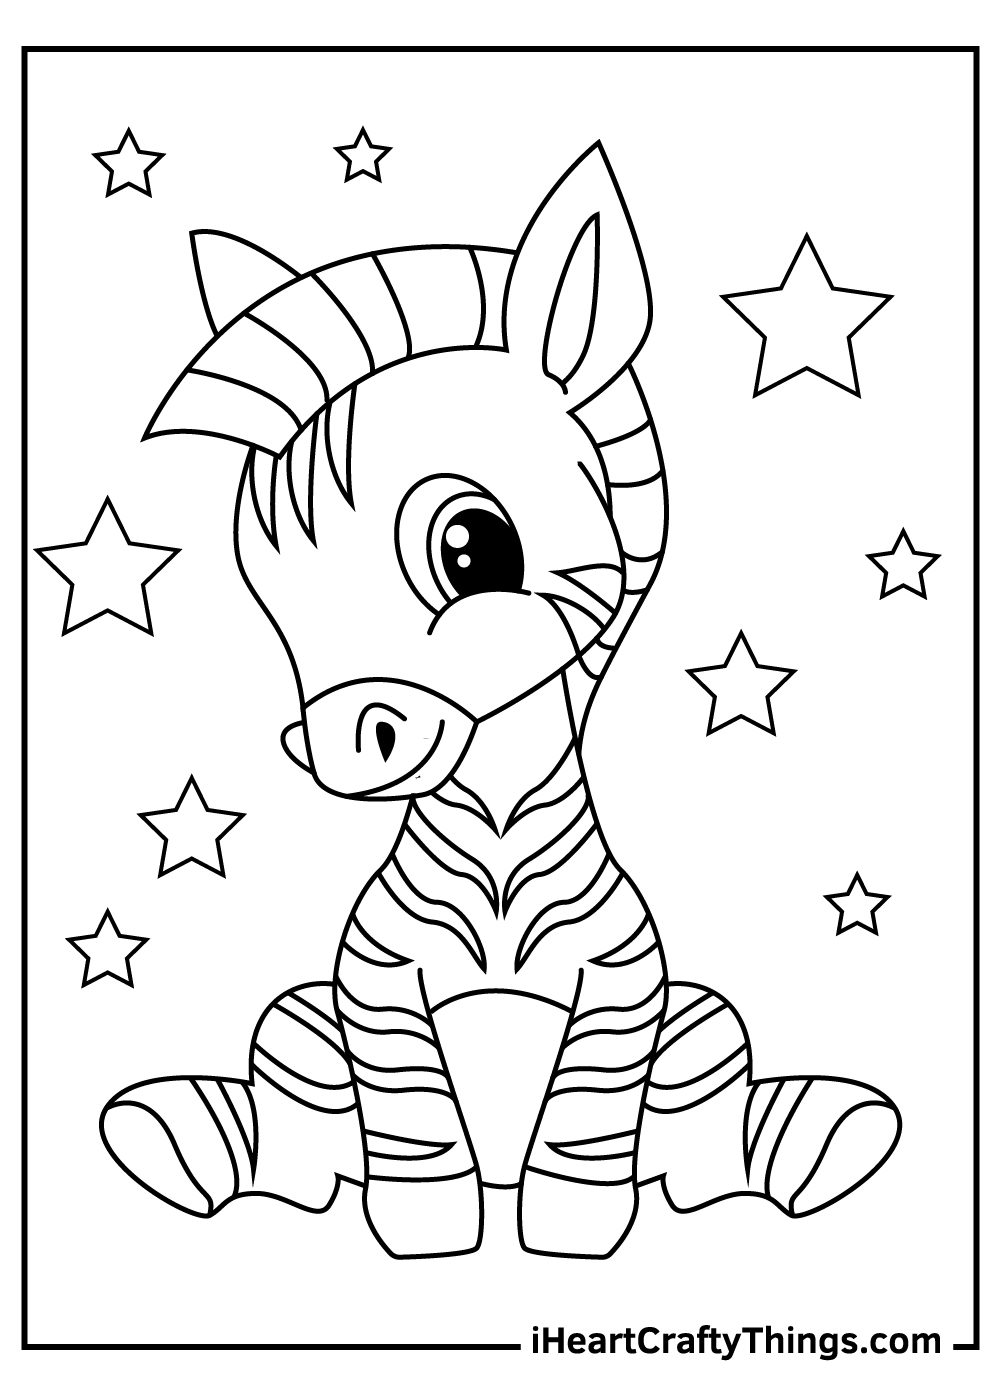 Printable Zebra Coloring Pages Updated 20